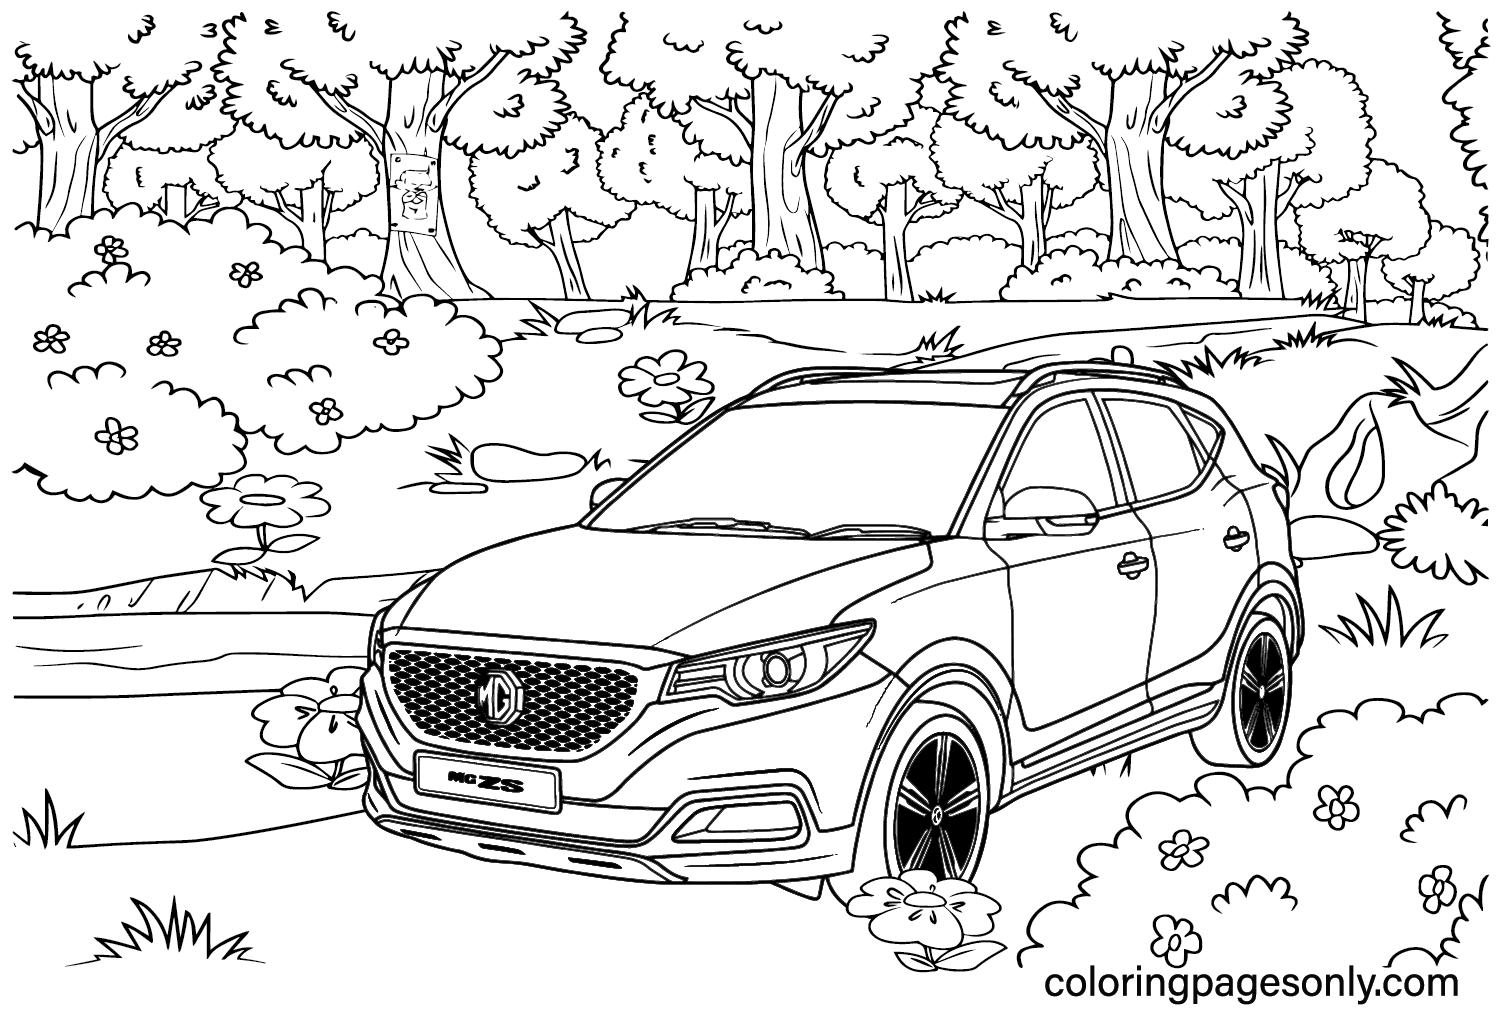 MG ZS Coloring Page from MG